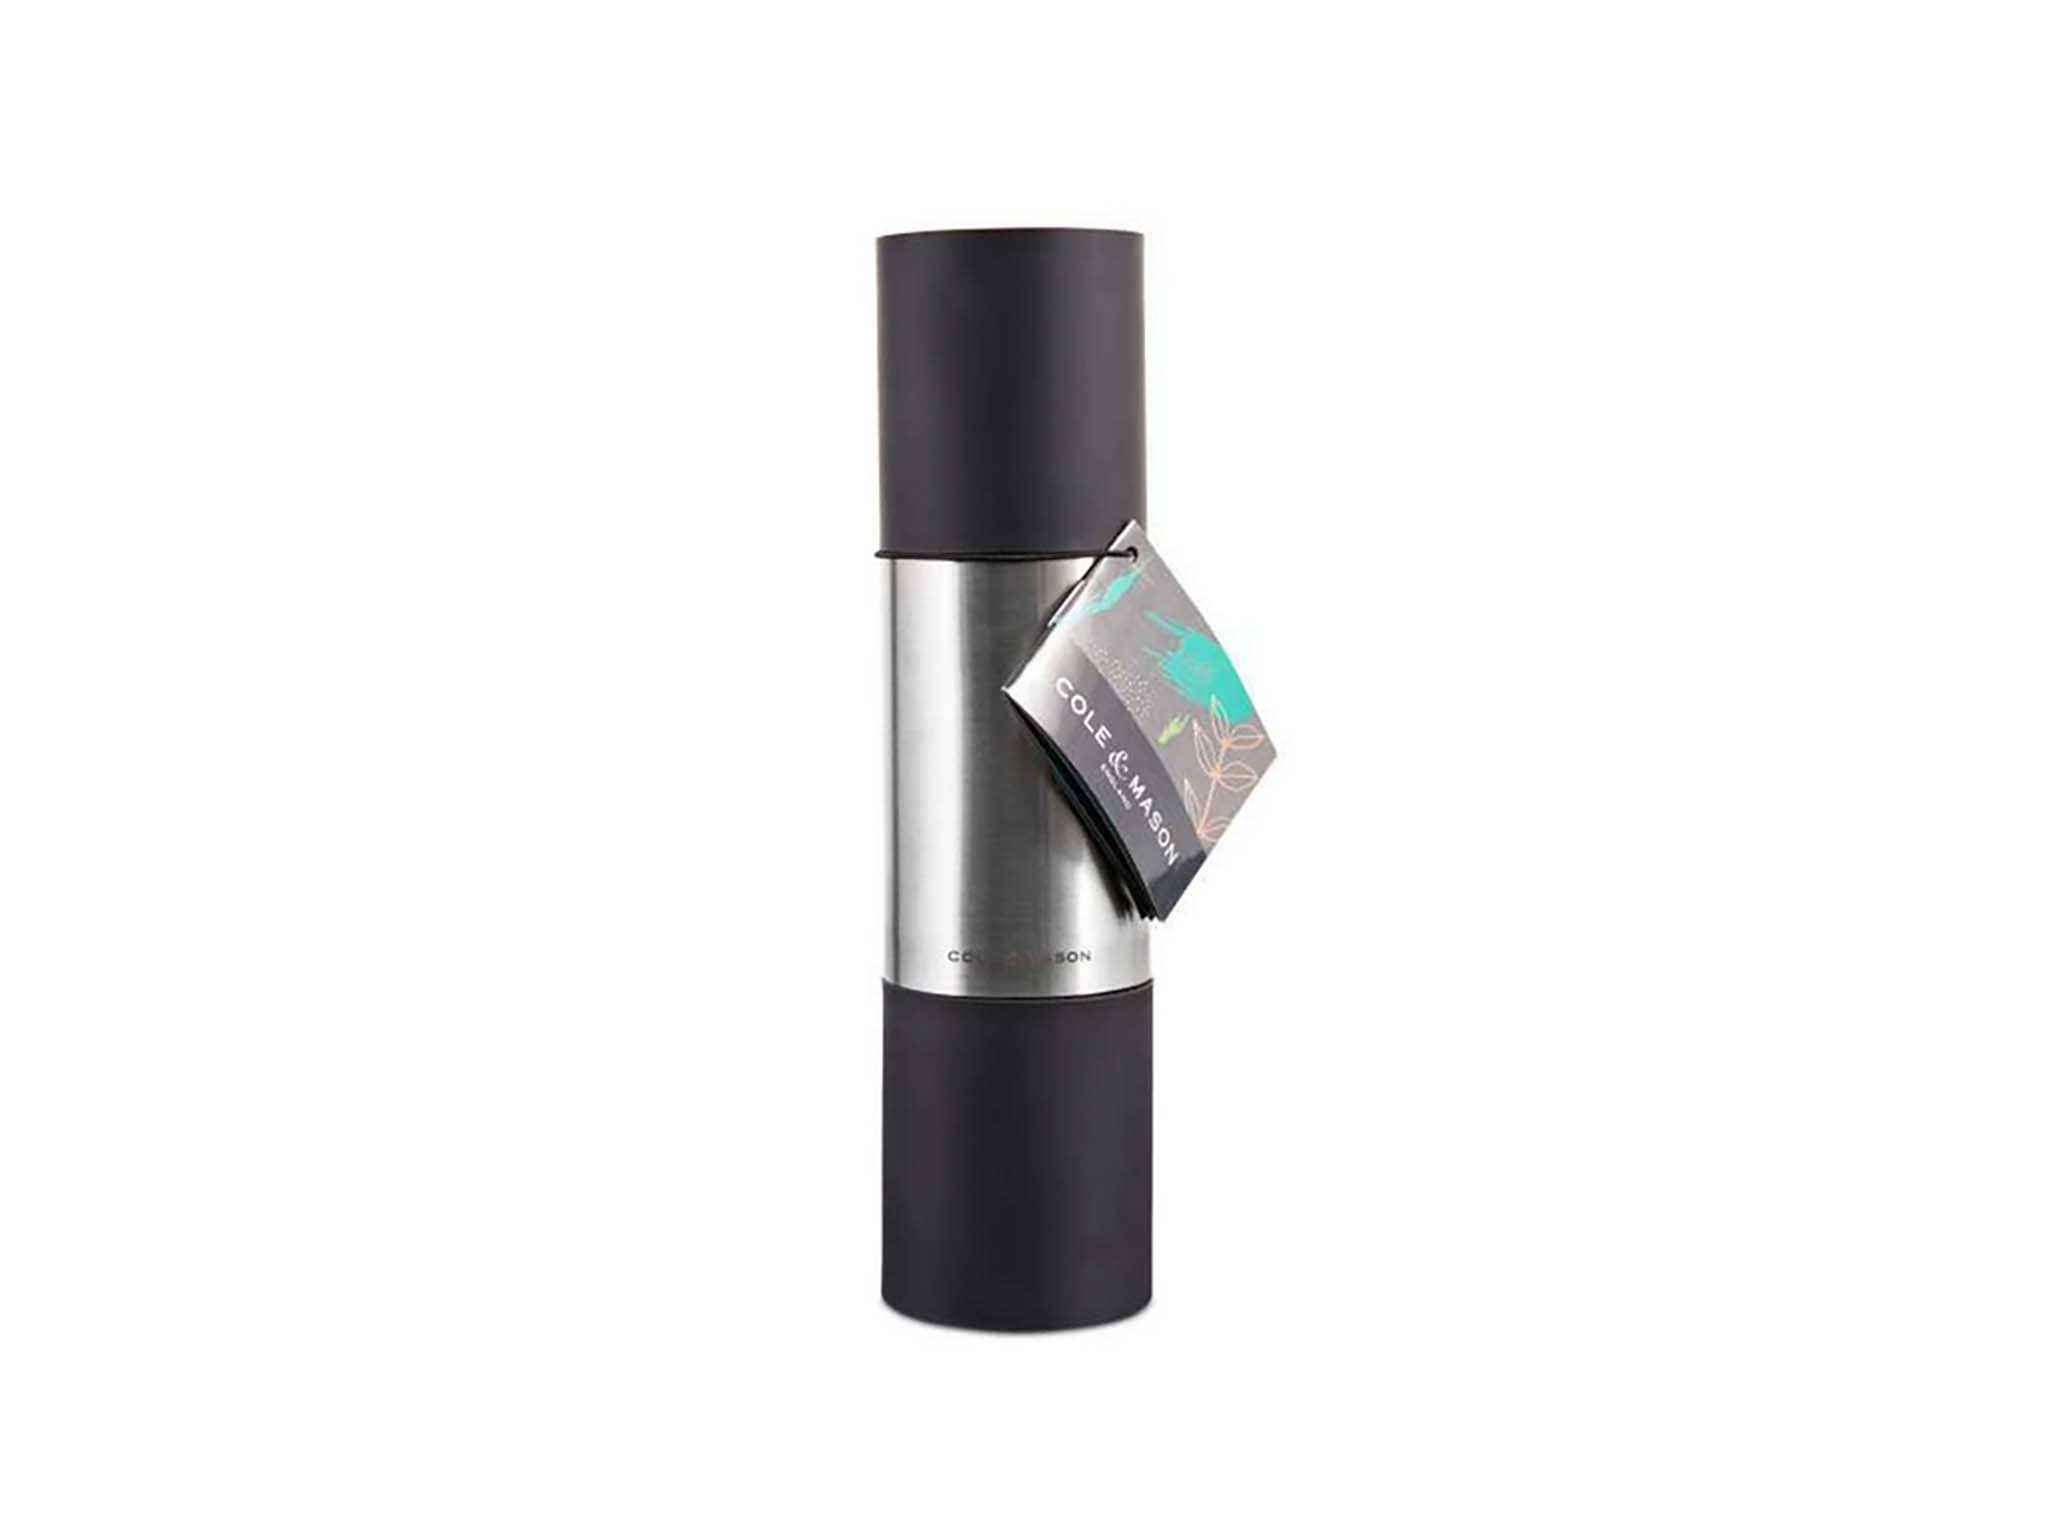 Clevedon duo salt and pepper mill